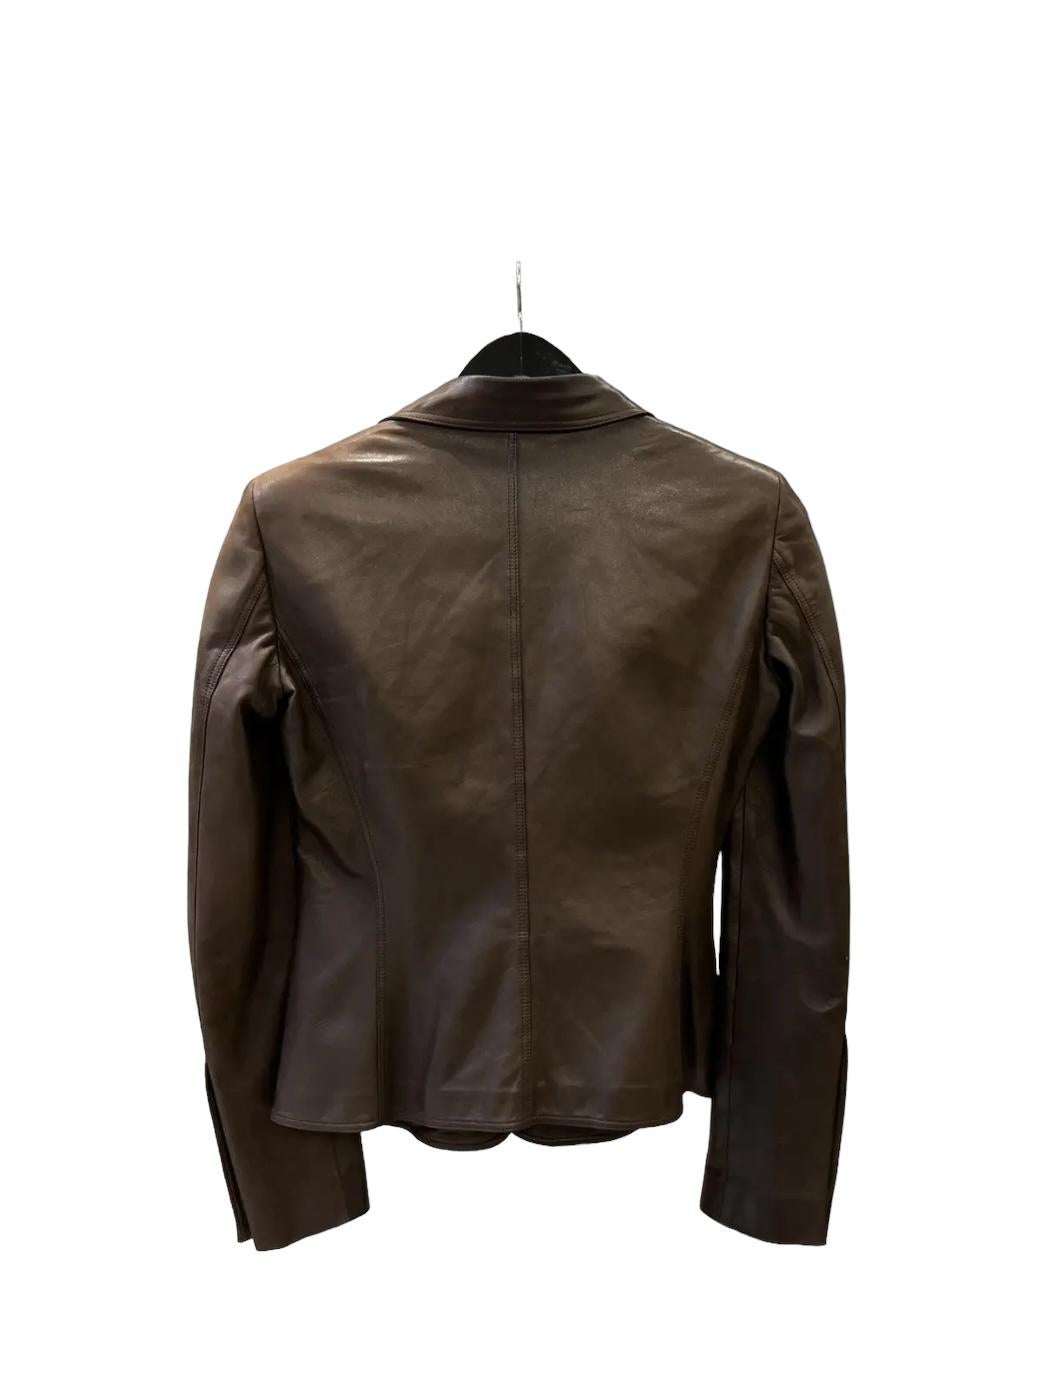 Gucci
Vintage Brown Leather Blazer Jacket
Size Small

Beautiful Gucci vintage brown leather blazer jacket in a size small. In great condition without flaws. Made in Italy.

